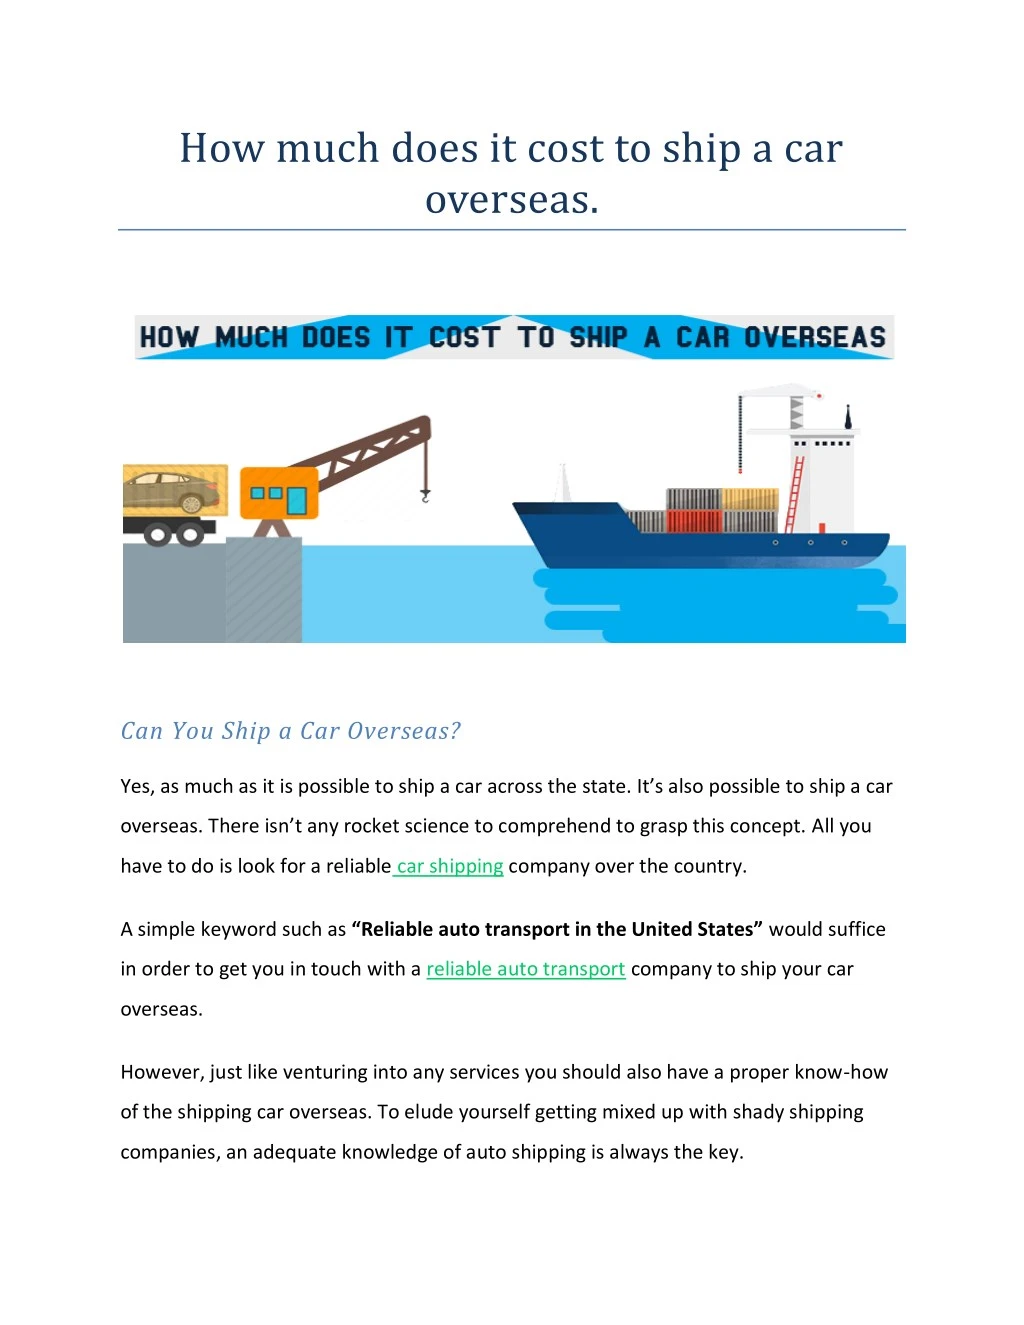 how much does it cost to ship a car overseas